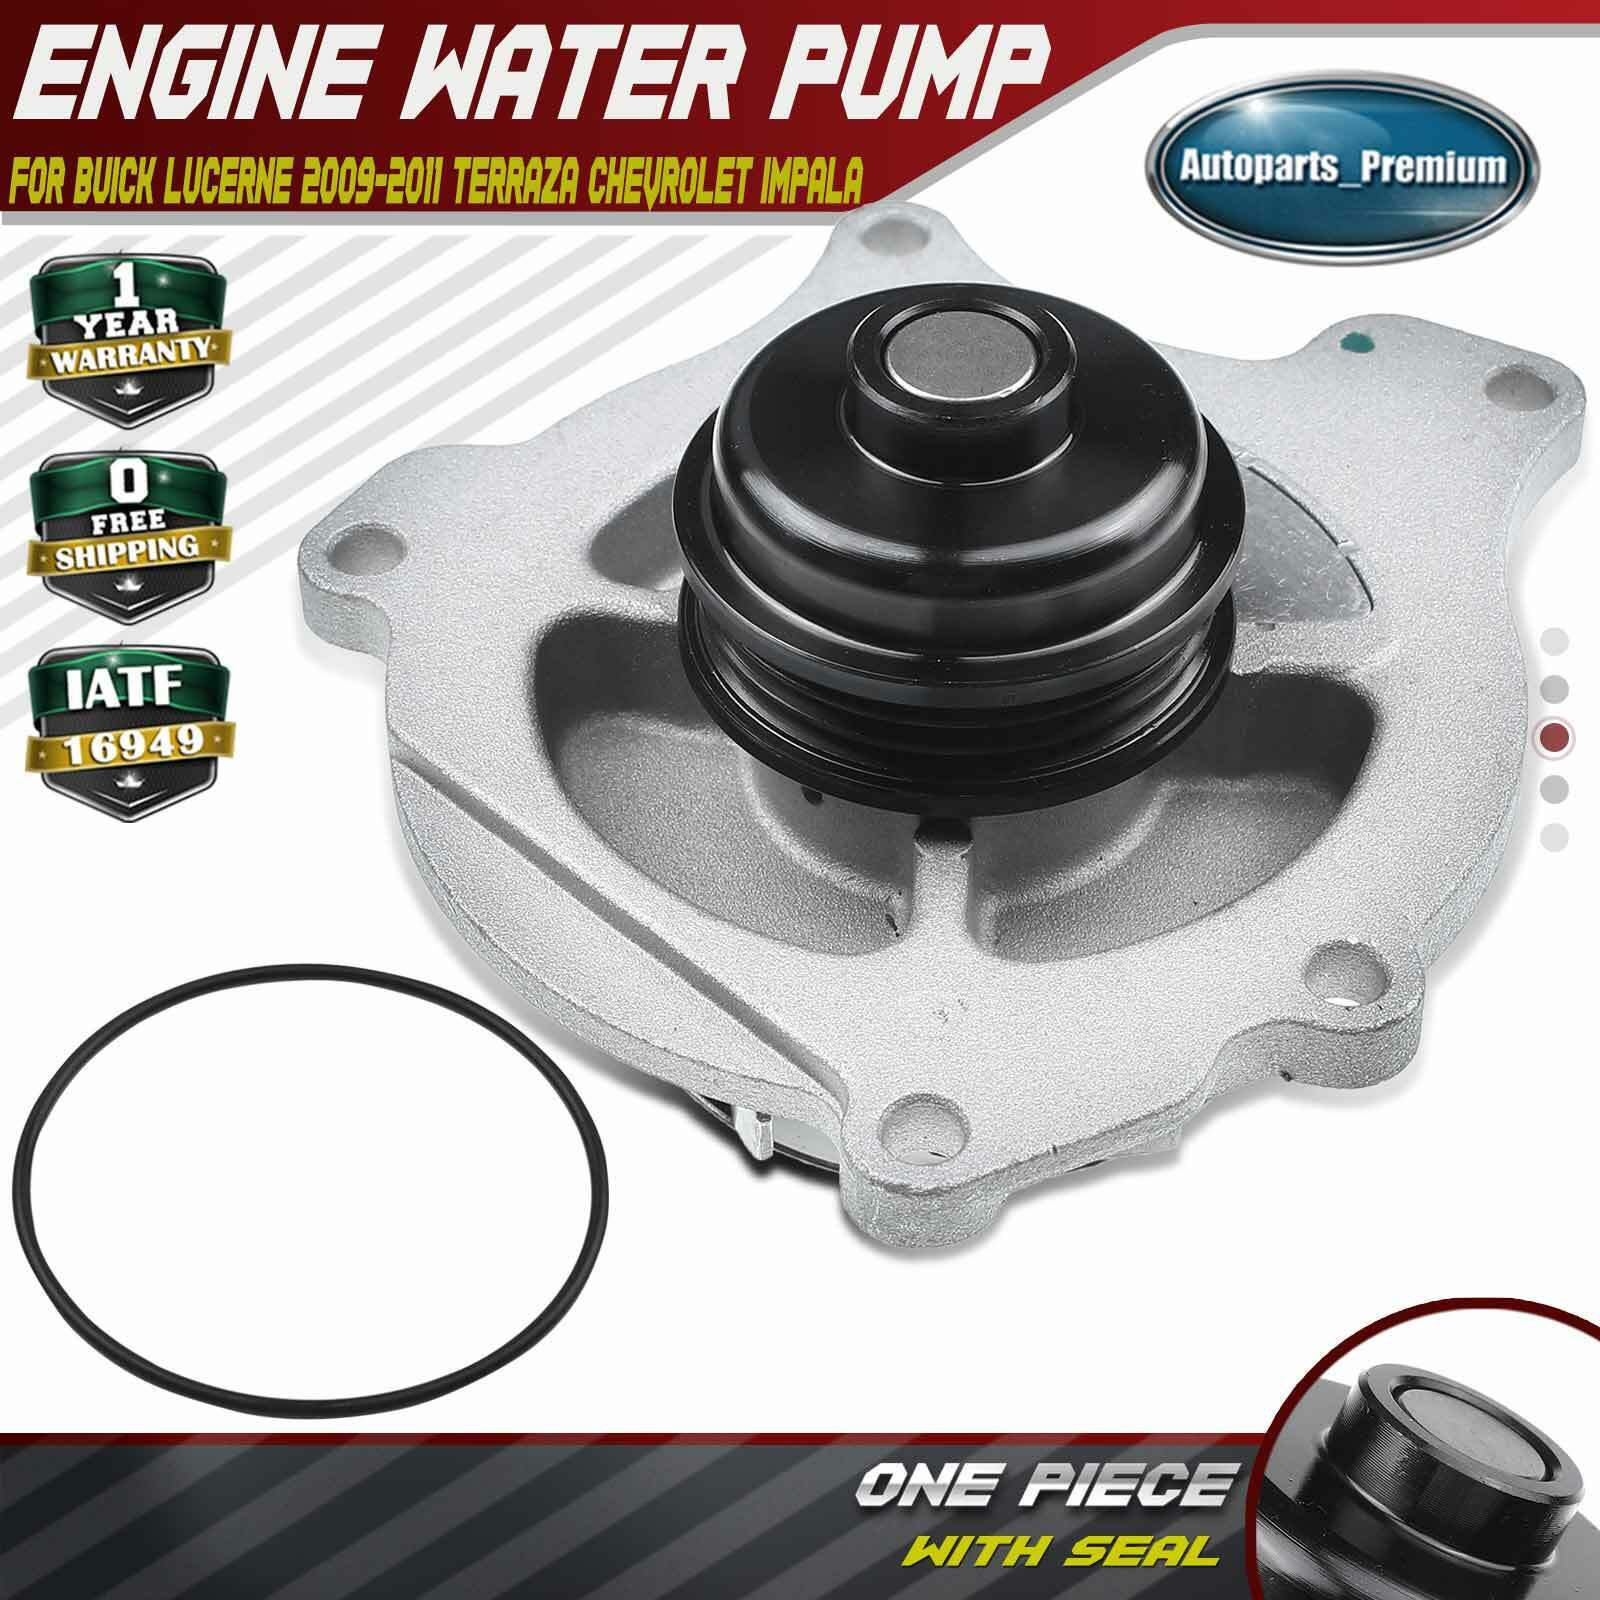 Engine Water Pump with Seal for Buick Lucerne Cadillac DTS 2006-2011 V8 4.6L Gas